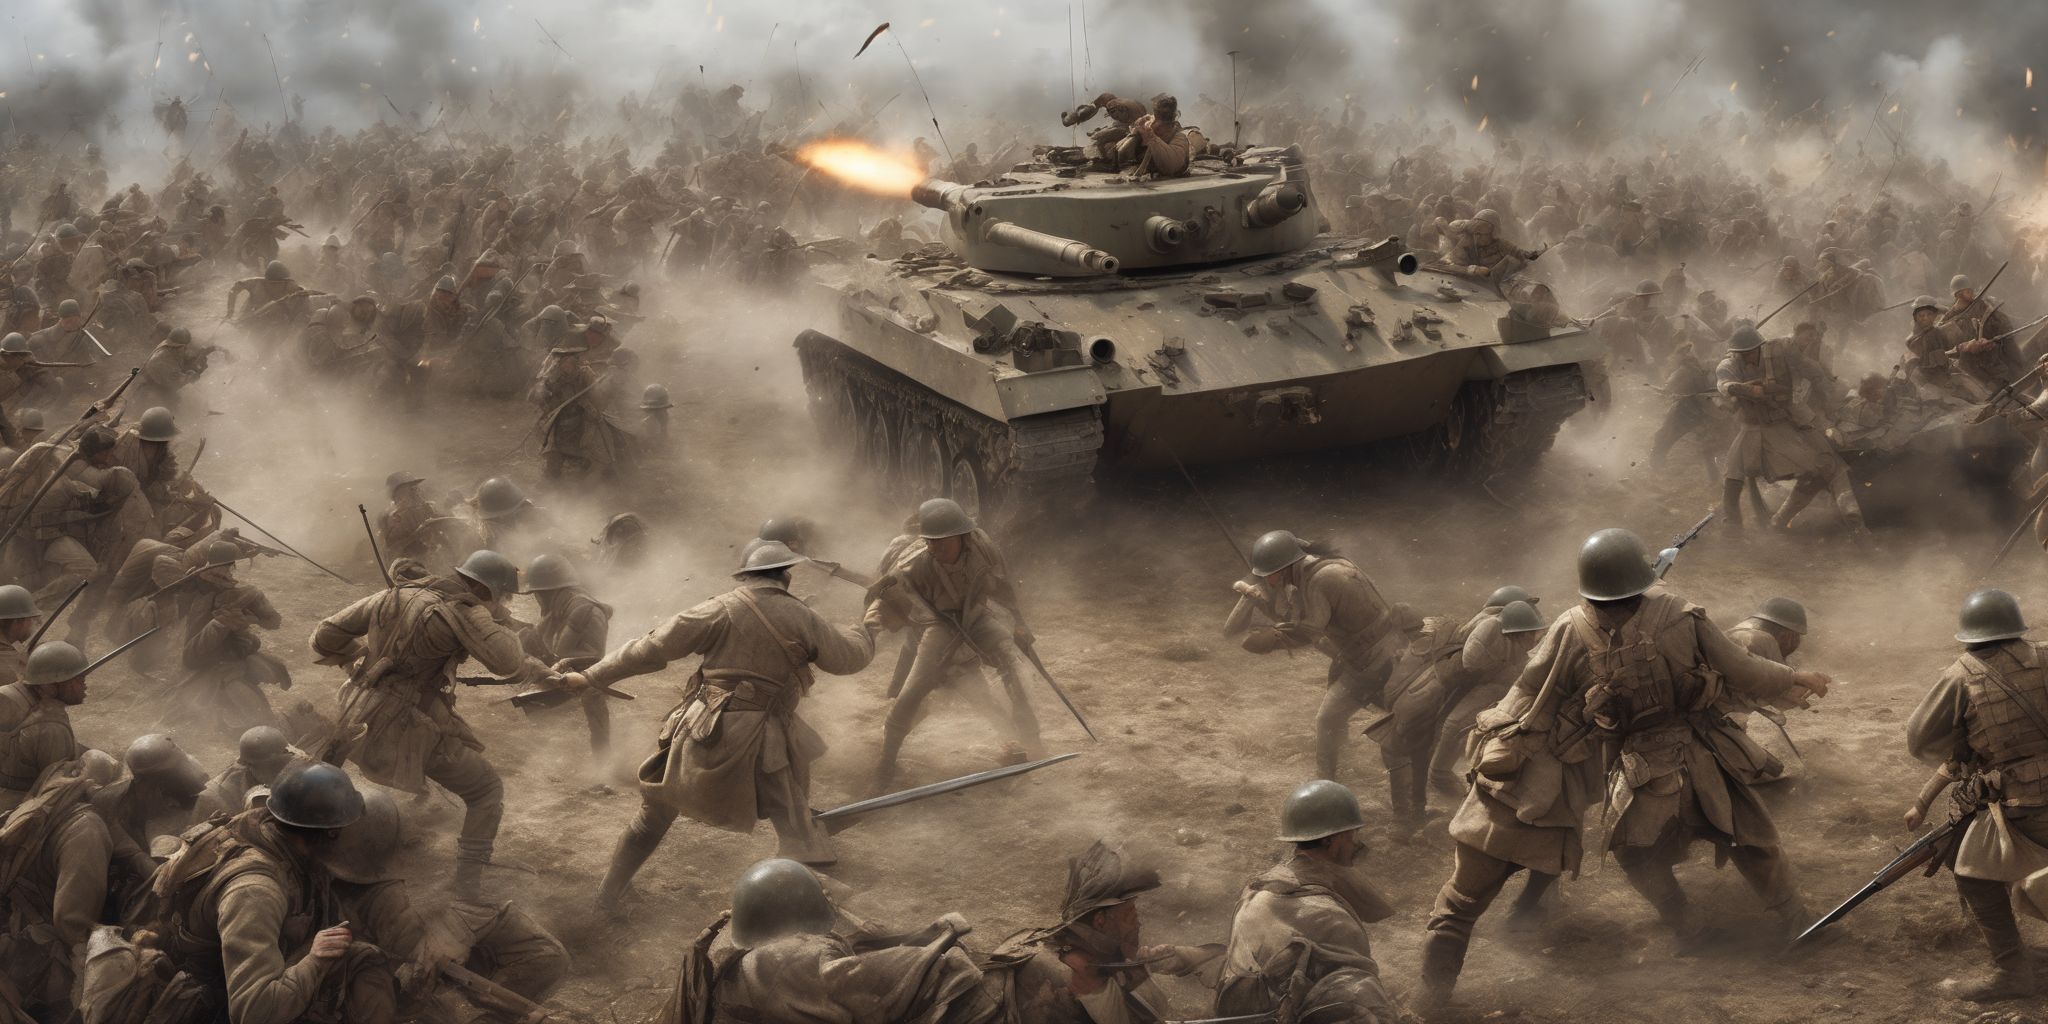 Battle  in realistic, photographic style